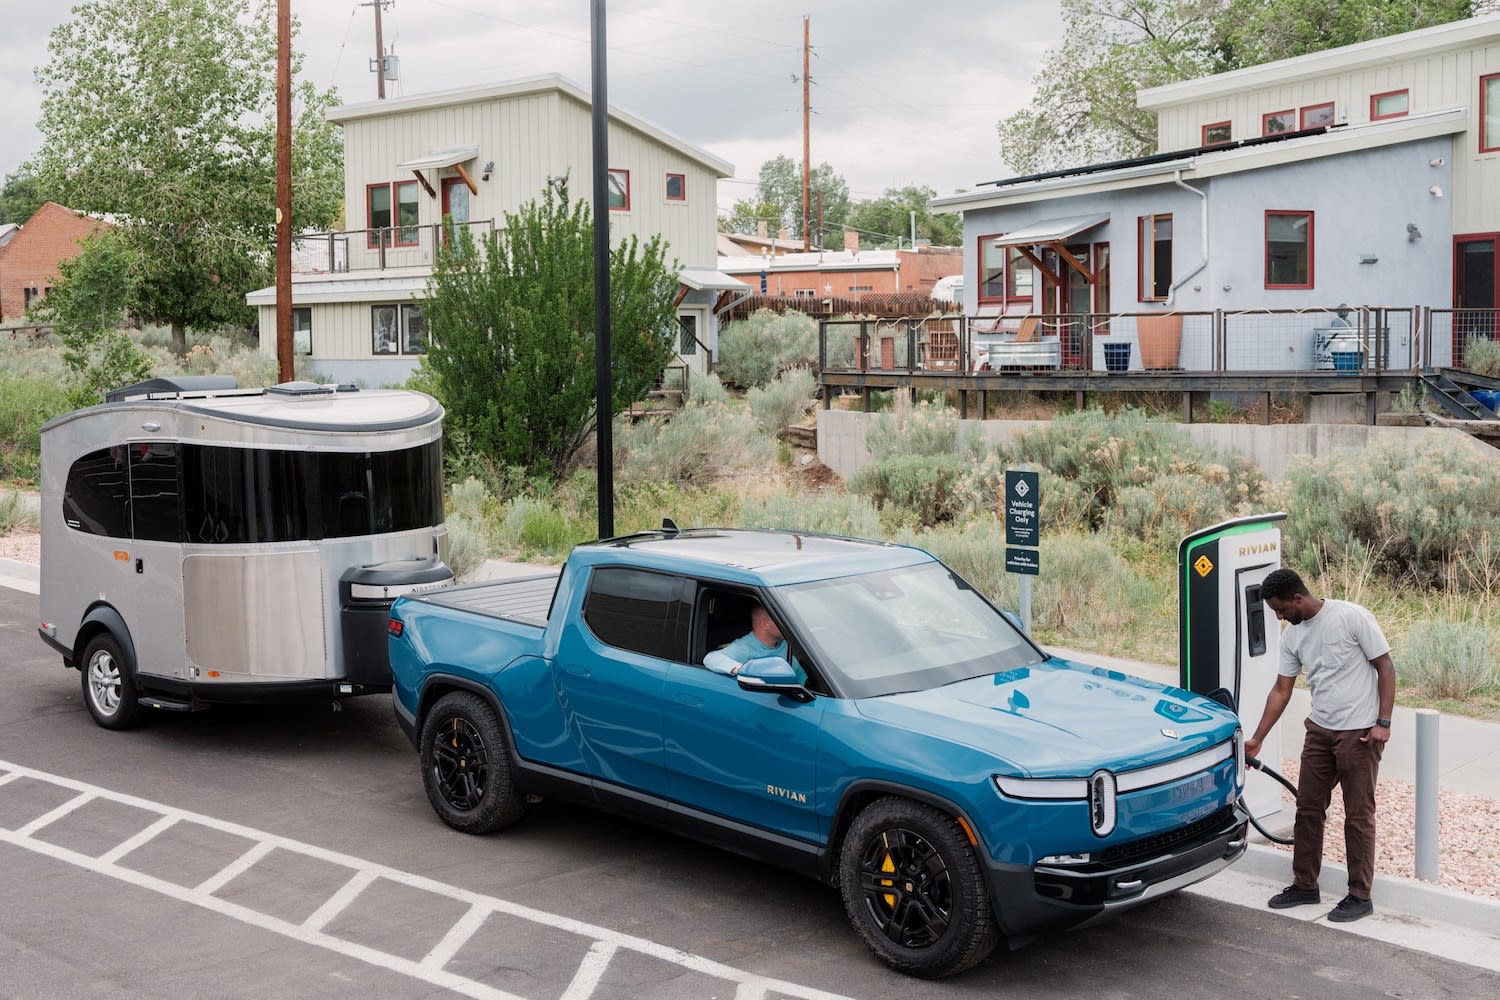 We plan to open Rivian Adventure Network fast charging sites across North America, from coast to coast, on major interstate highways such as I-5, I-80, I-75 and I-95.